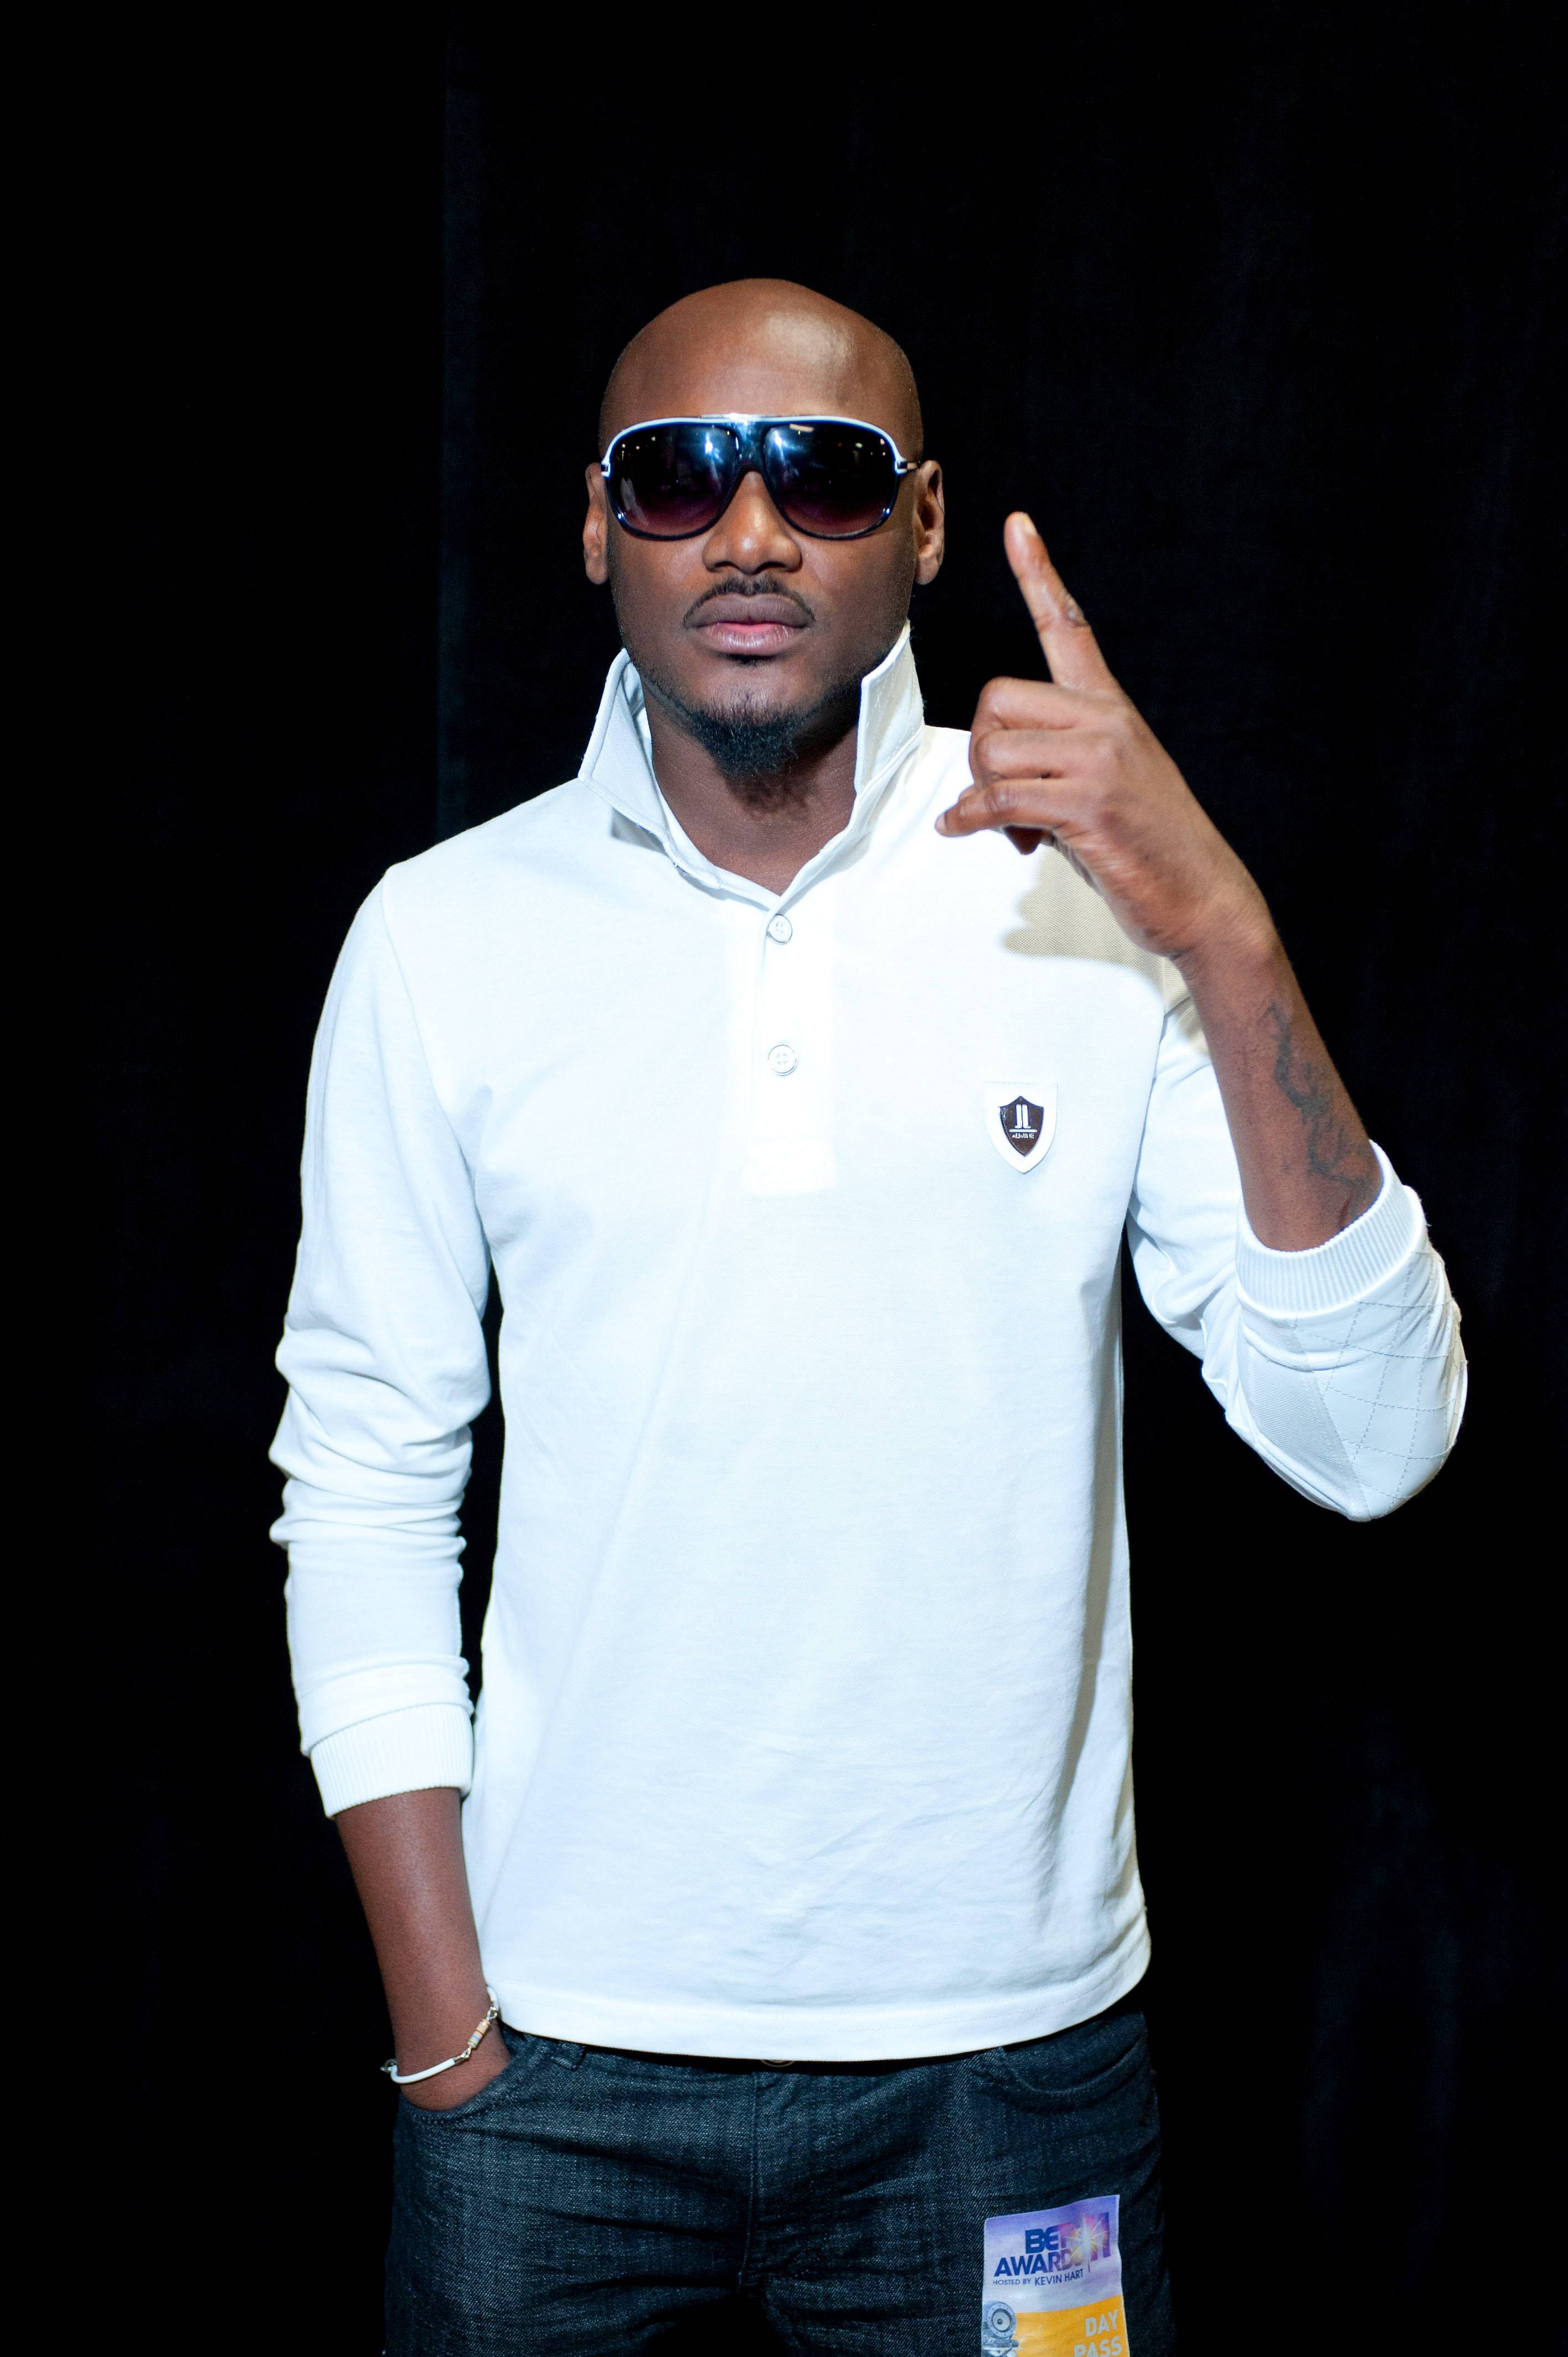 2Face Idibia Best International Act: Africa - “I’m looking forward to the awards and I hope I win,” said the widely acclaimed singer while visiting the BET Awards Radio Remote Room. “My music is getting across gradually. I want to work with so many American artists, the list is endless. I’d love to work with Alicia Keys. I’m just happy my music is getting out there.”Photo: Adrian Sidney/PictureGroup